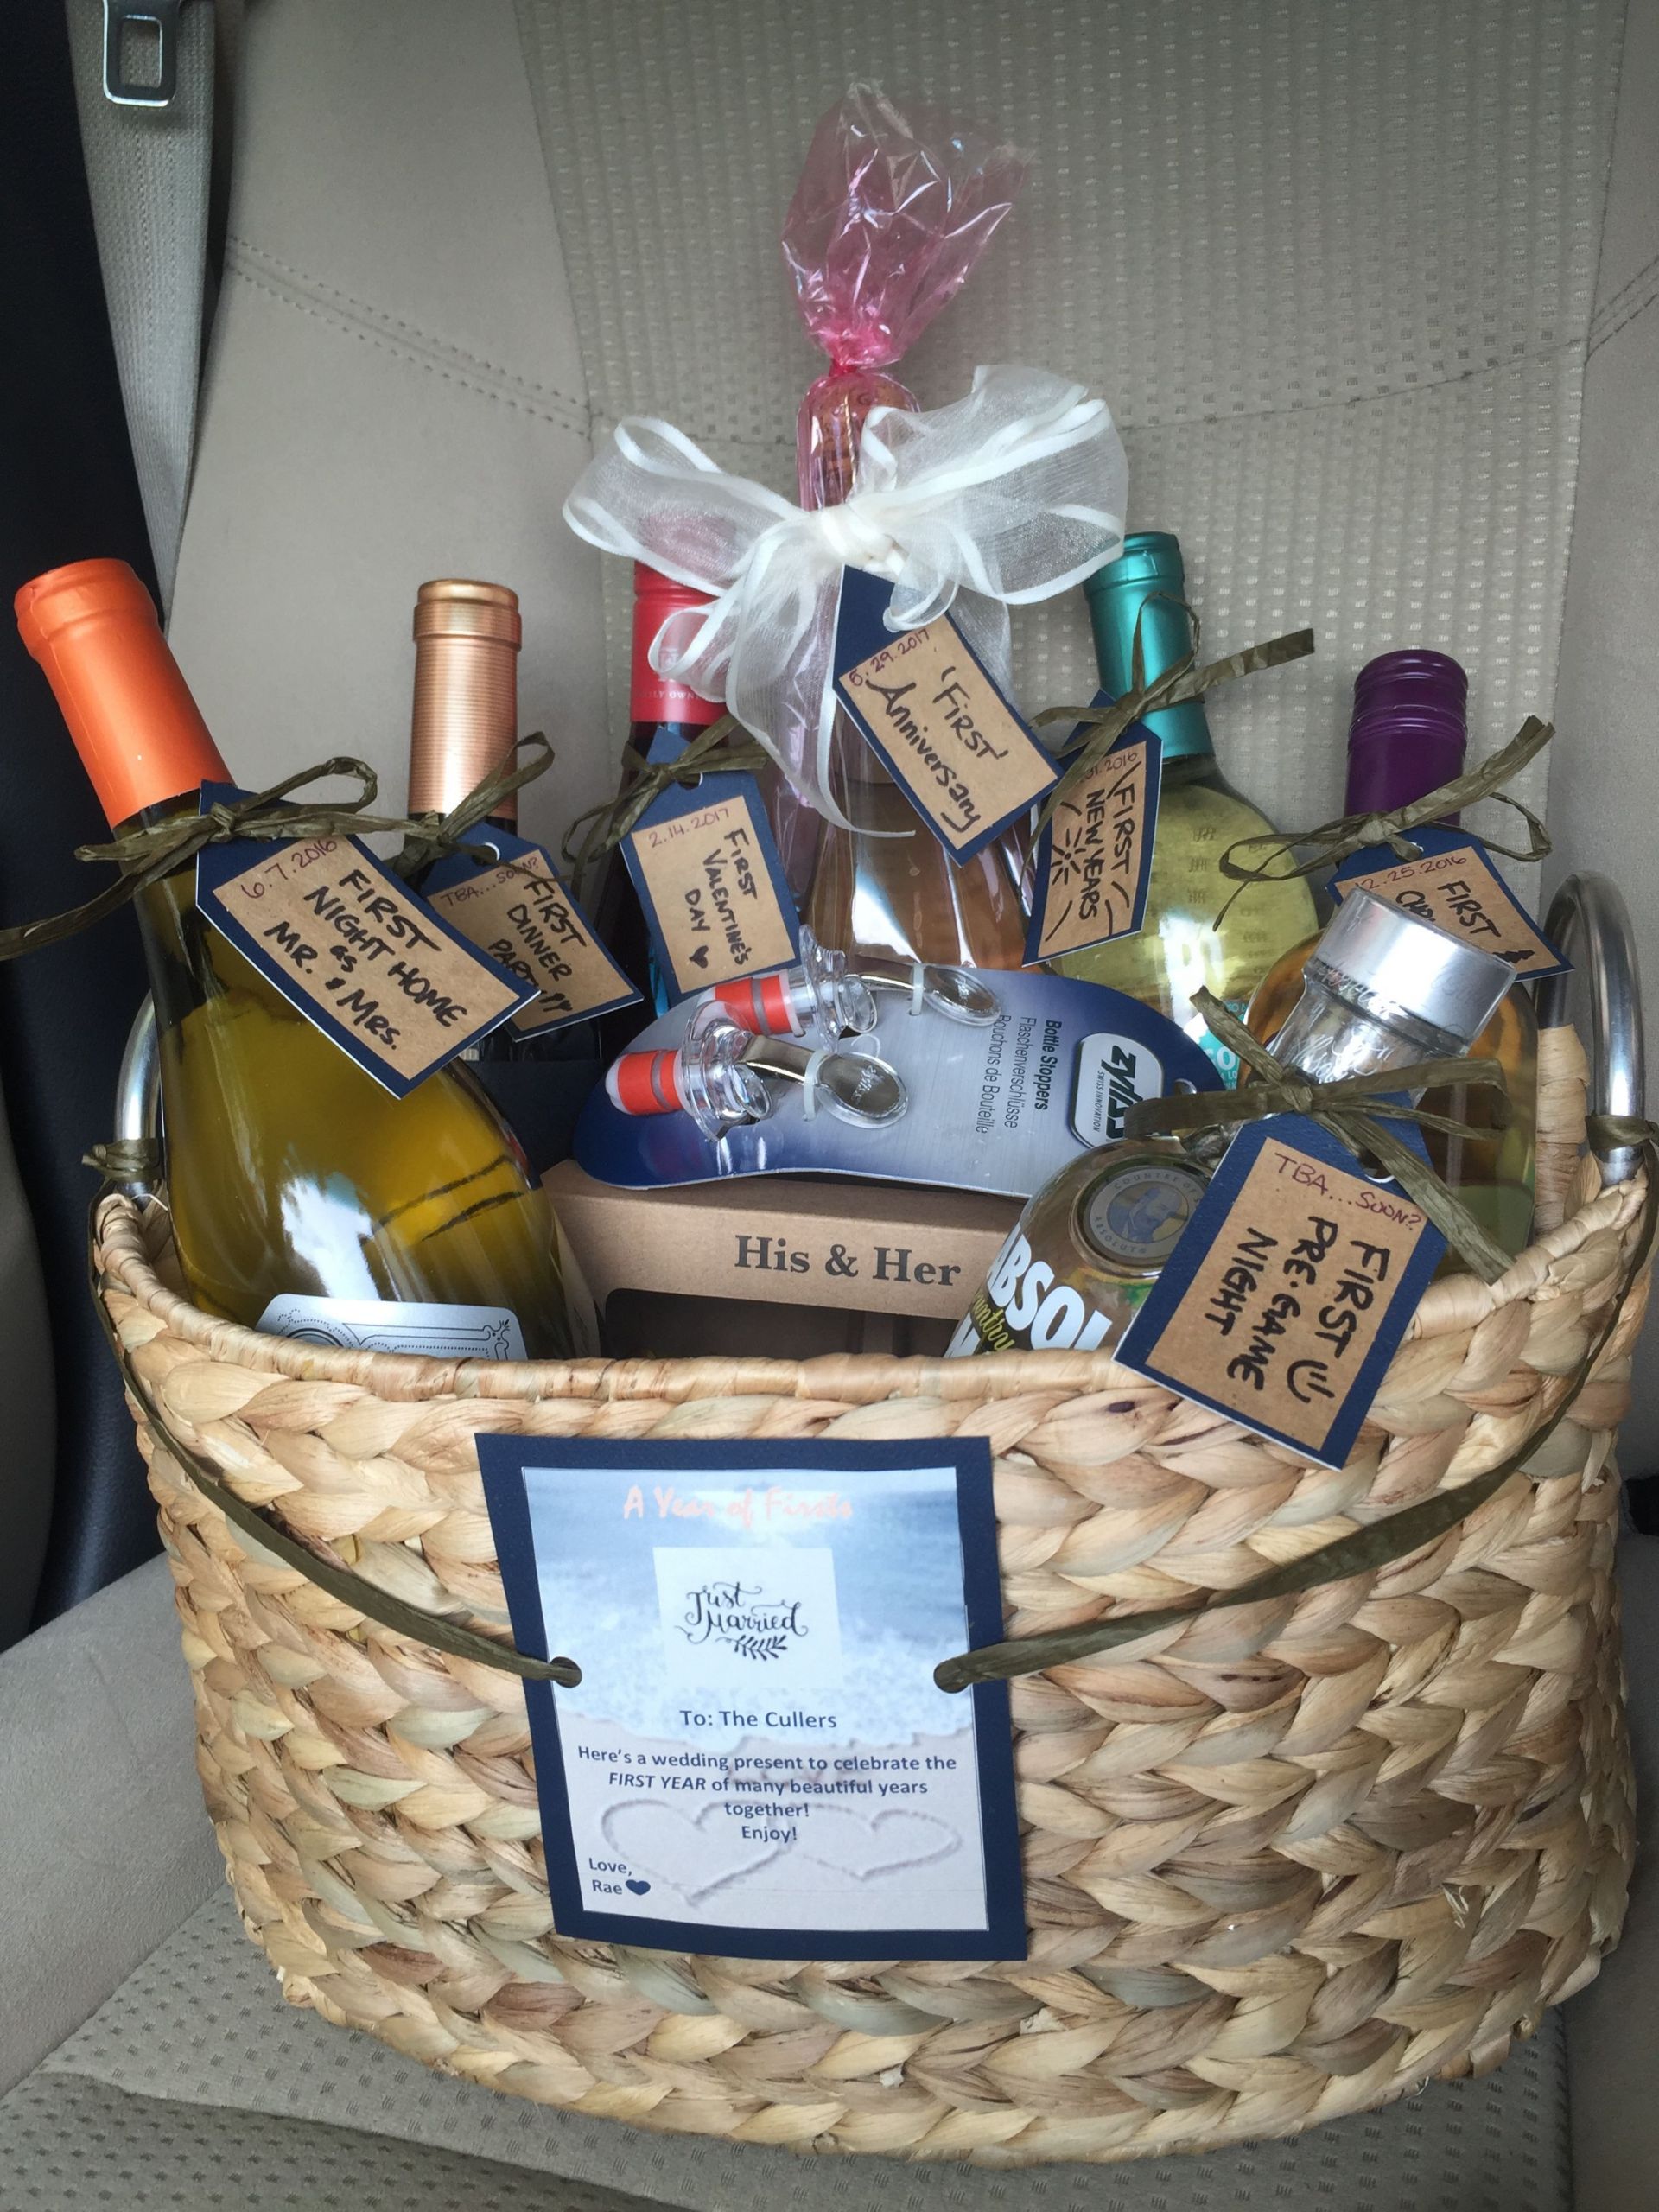 Gift Basket Ideas For Couple
 A year of firsts The BEST and easiest wedding present for